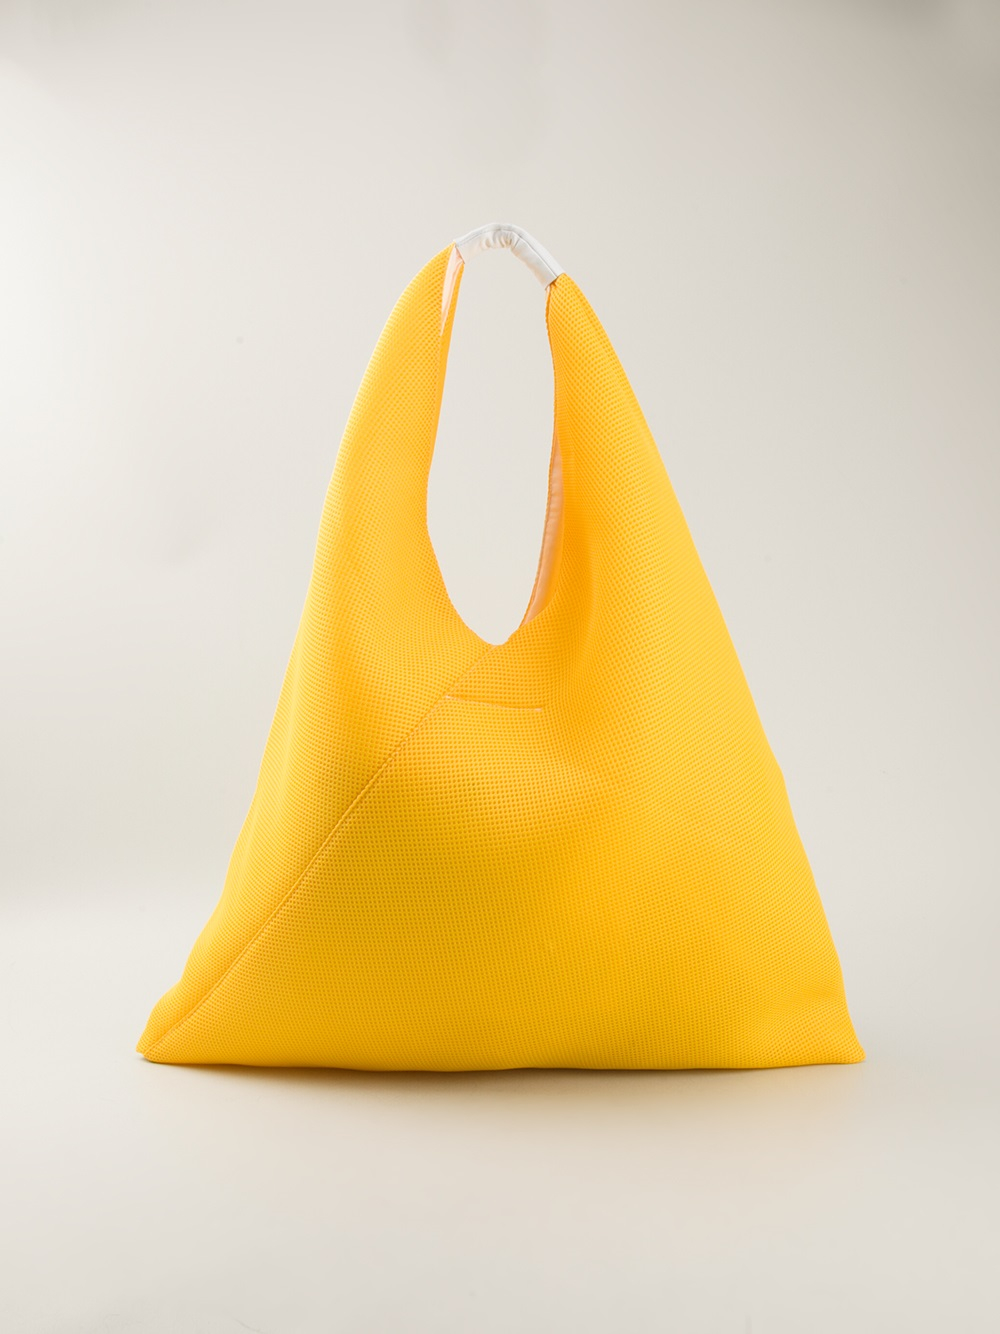 MM6 by Maison Martin Margiela Mm6 Tote Bag in Yellow & Orange 